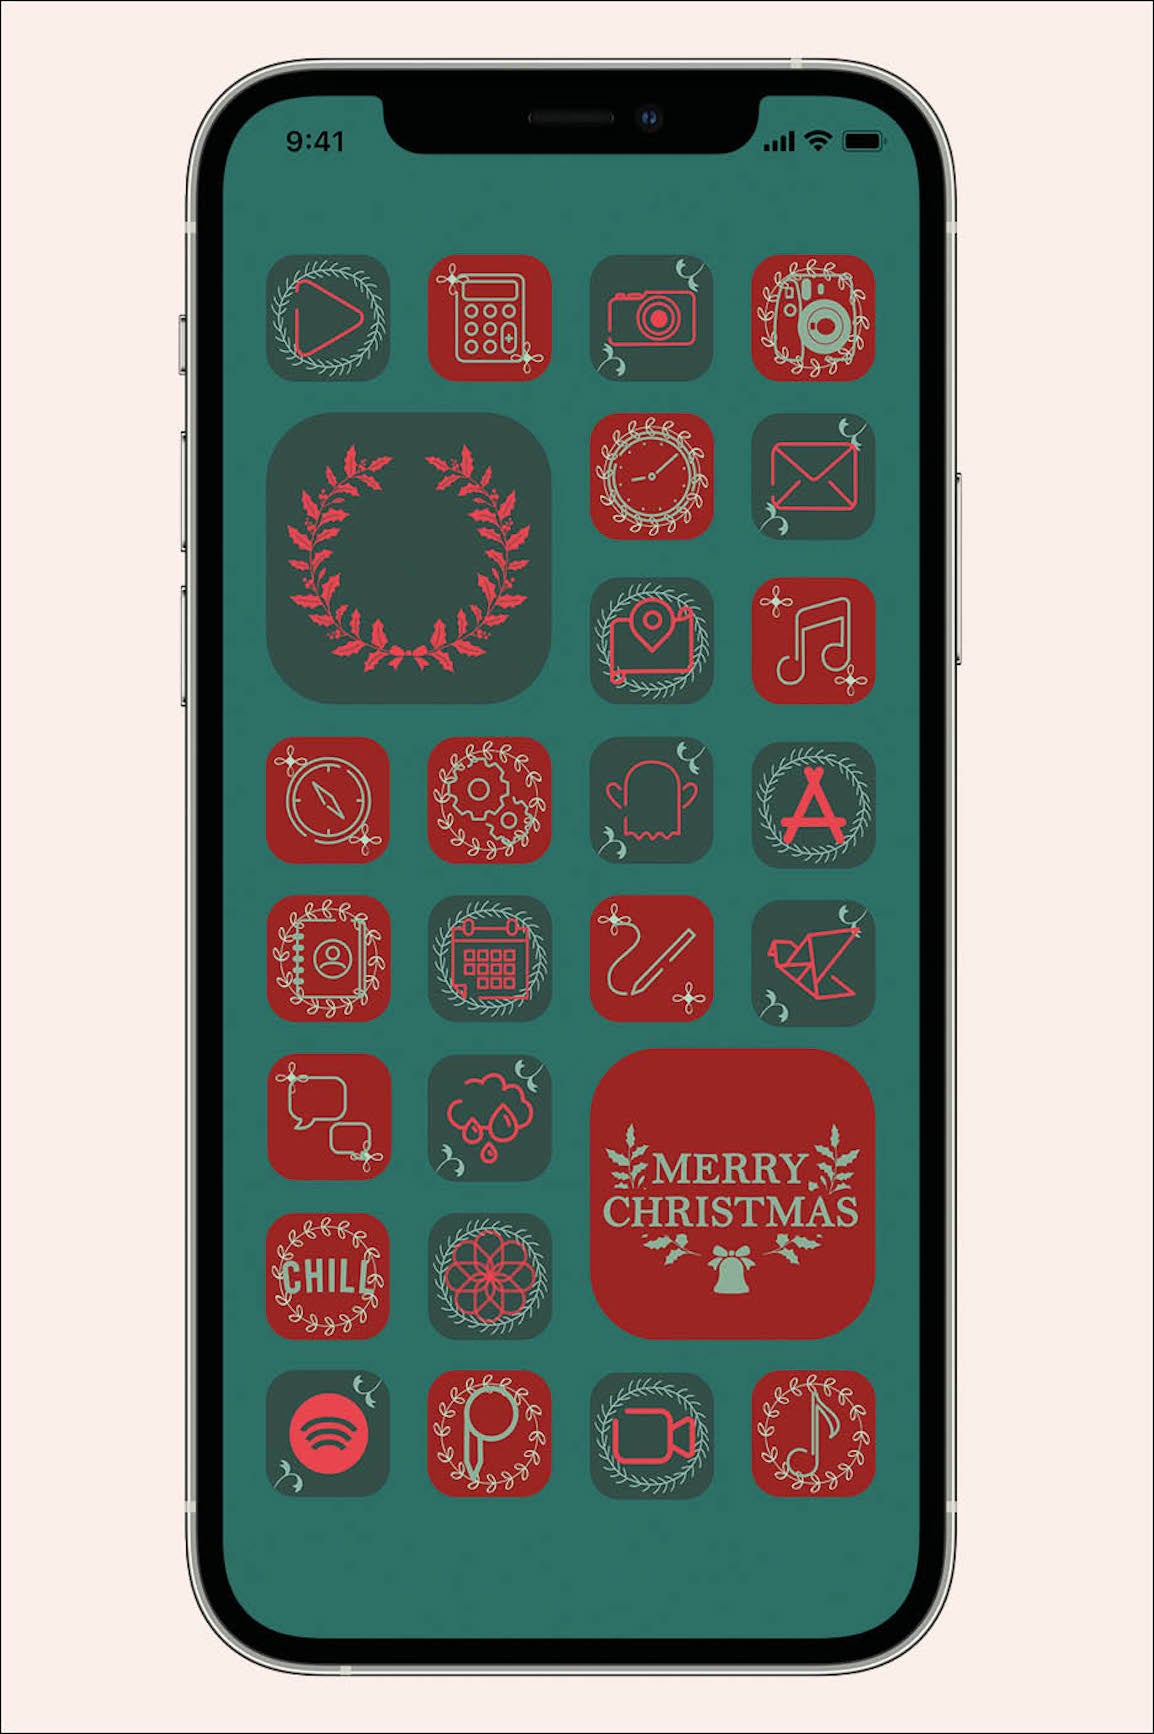 dark green and red holiday cheer ios icon pack with holiday inspired apps and widgets